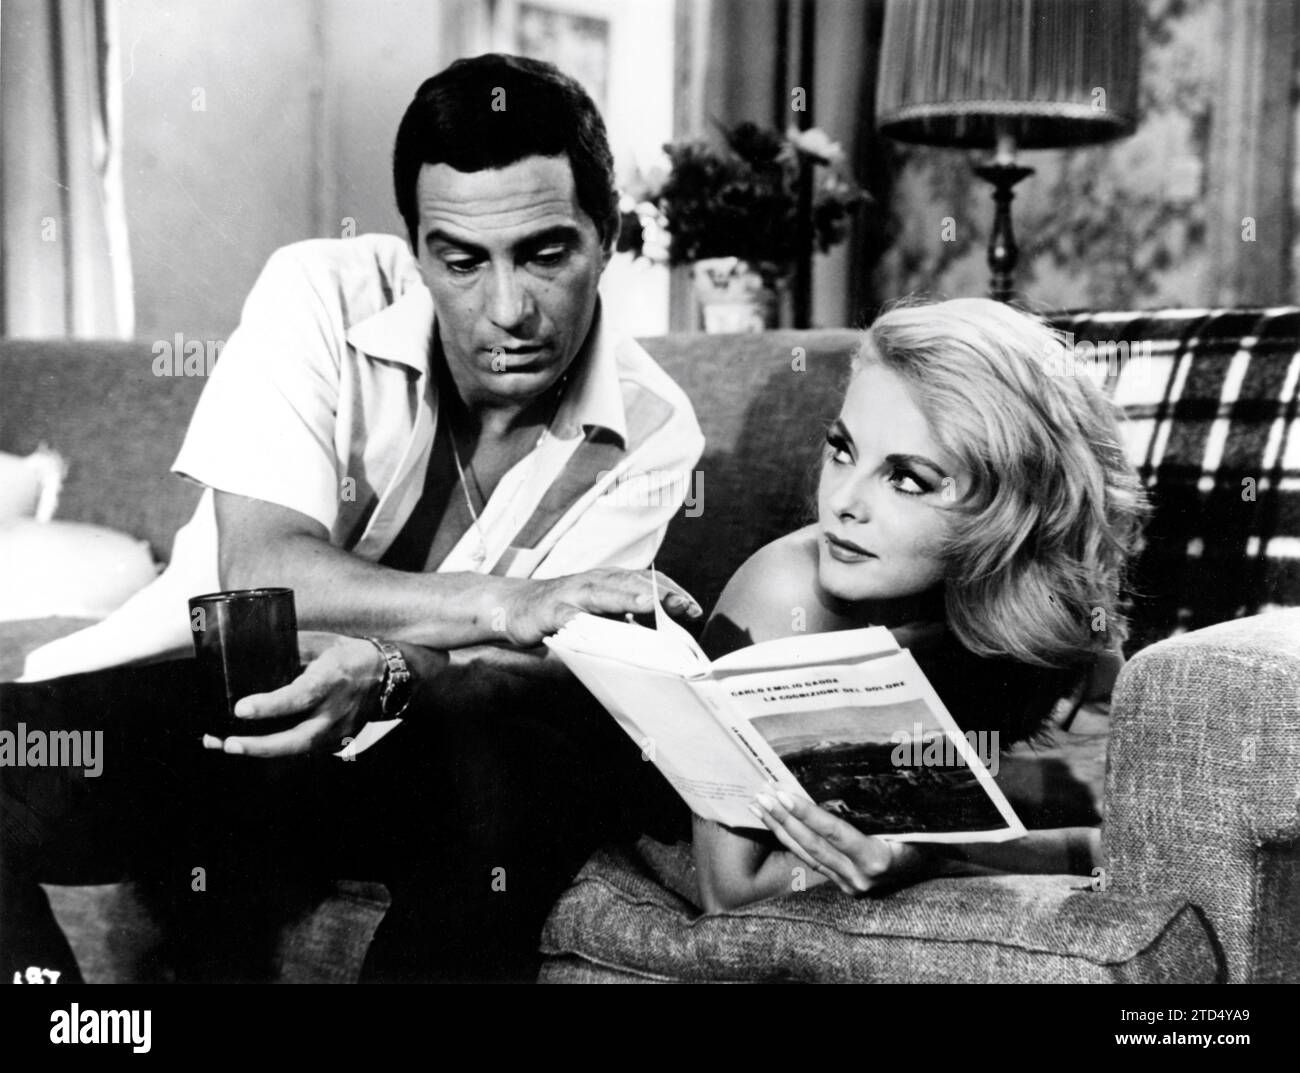 VIRNA LISI and NINO MANFREDI in the episode THE TELEPHONE CALL in the anthology film LE BAMBOLE / FOUR KINDS OF LOVE / THE DOLLS 1965 Italy - France co-production Documento Film / Orsay Films / Gala Film Distributors (UK) Stock Photo